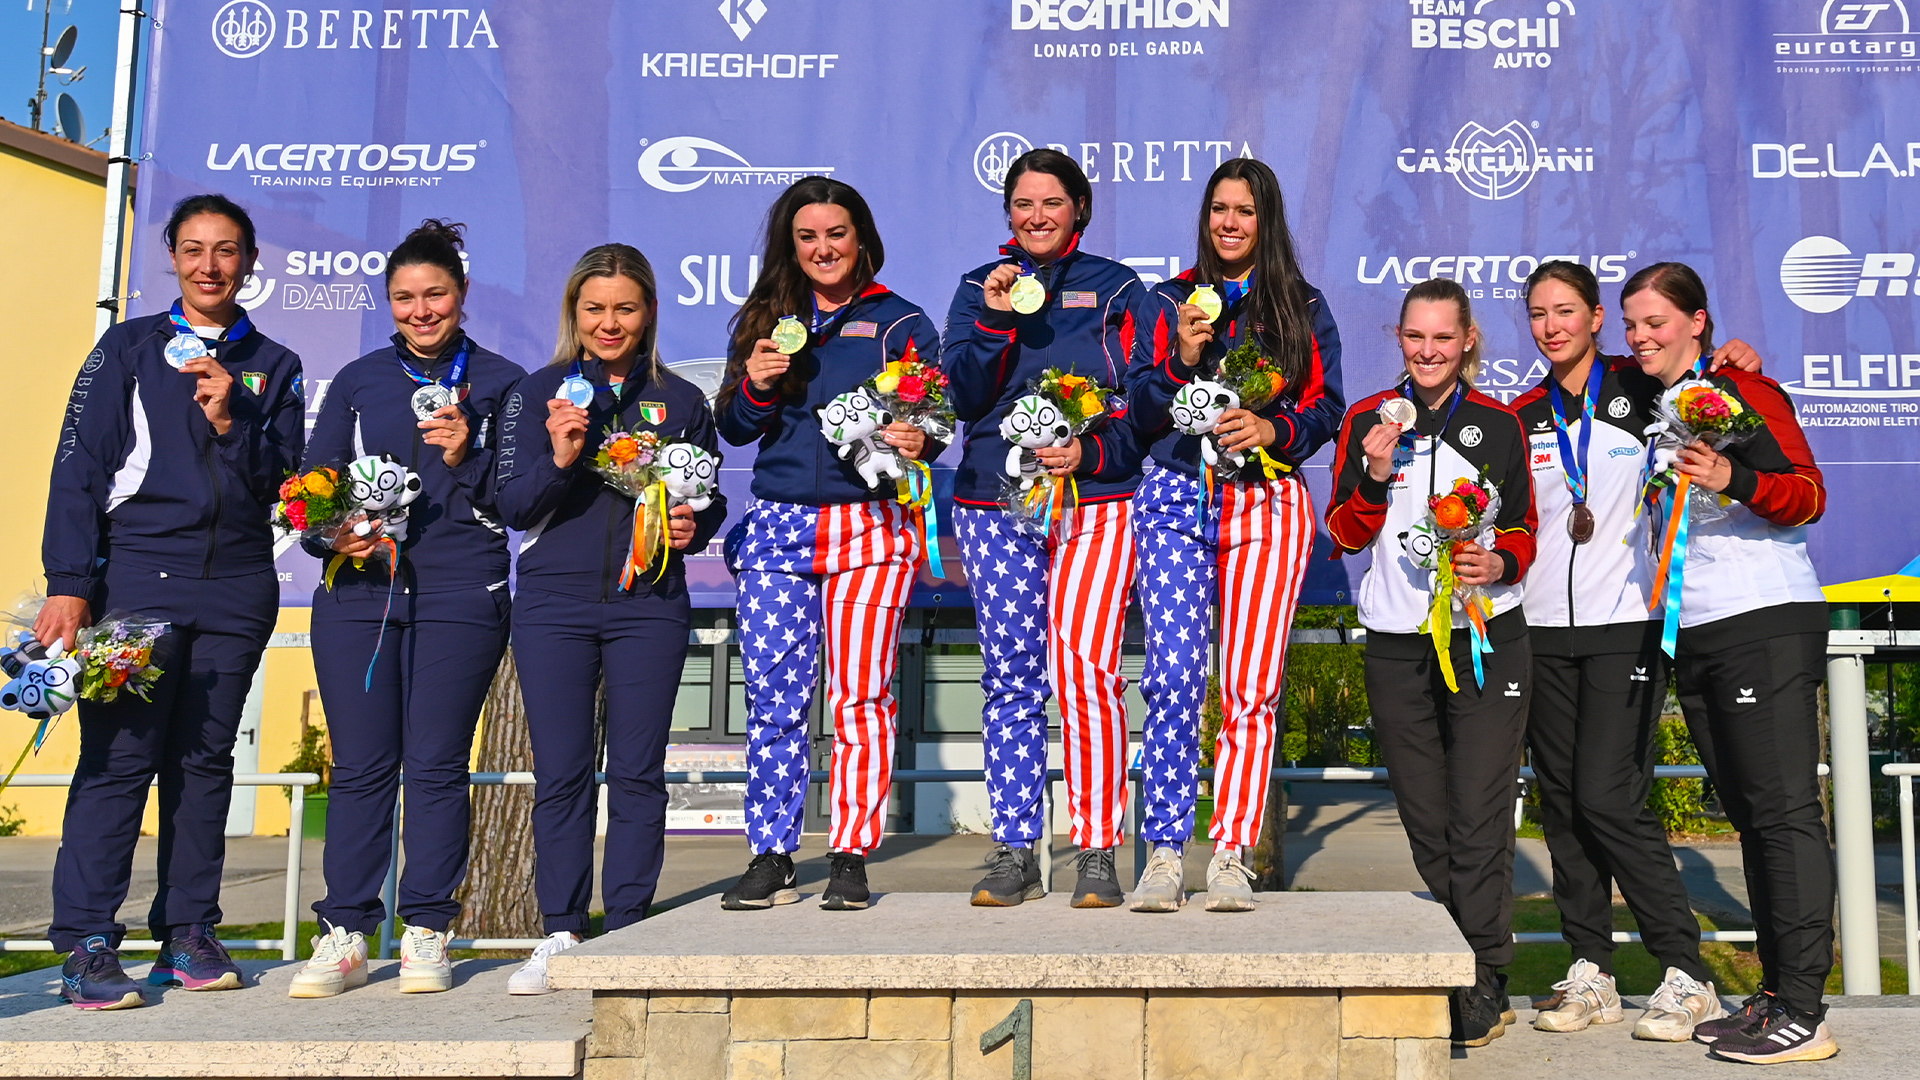 Team USA skeet shooters on podium in Italy